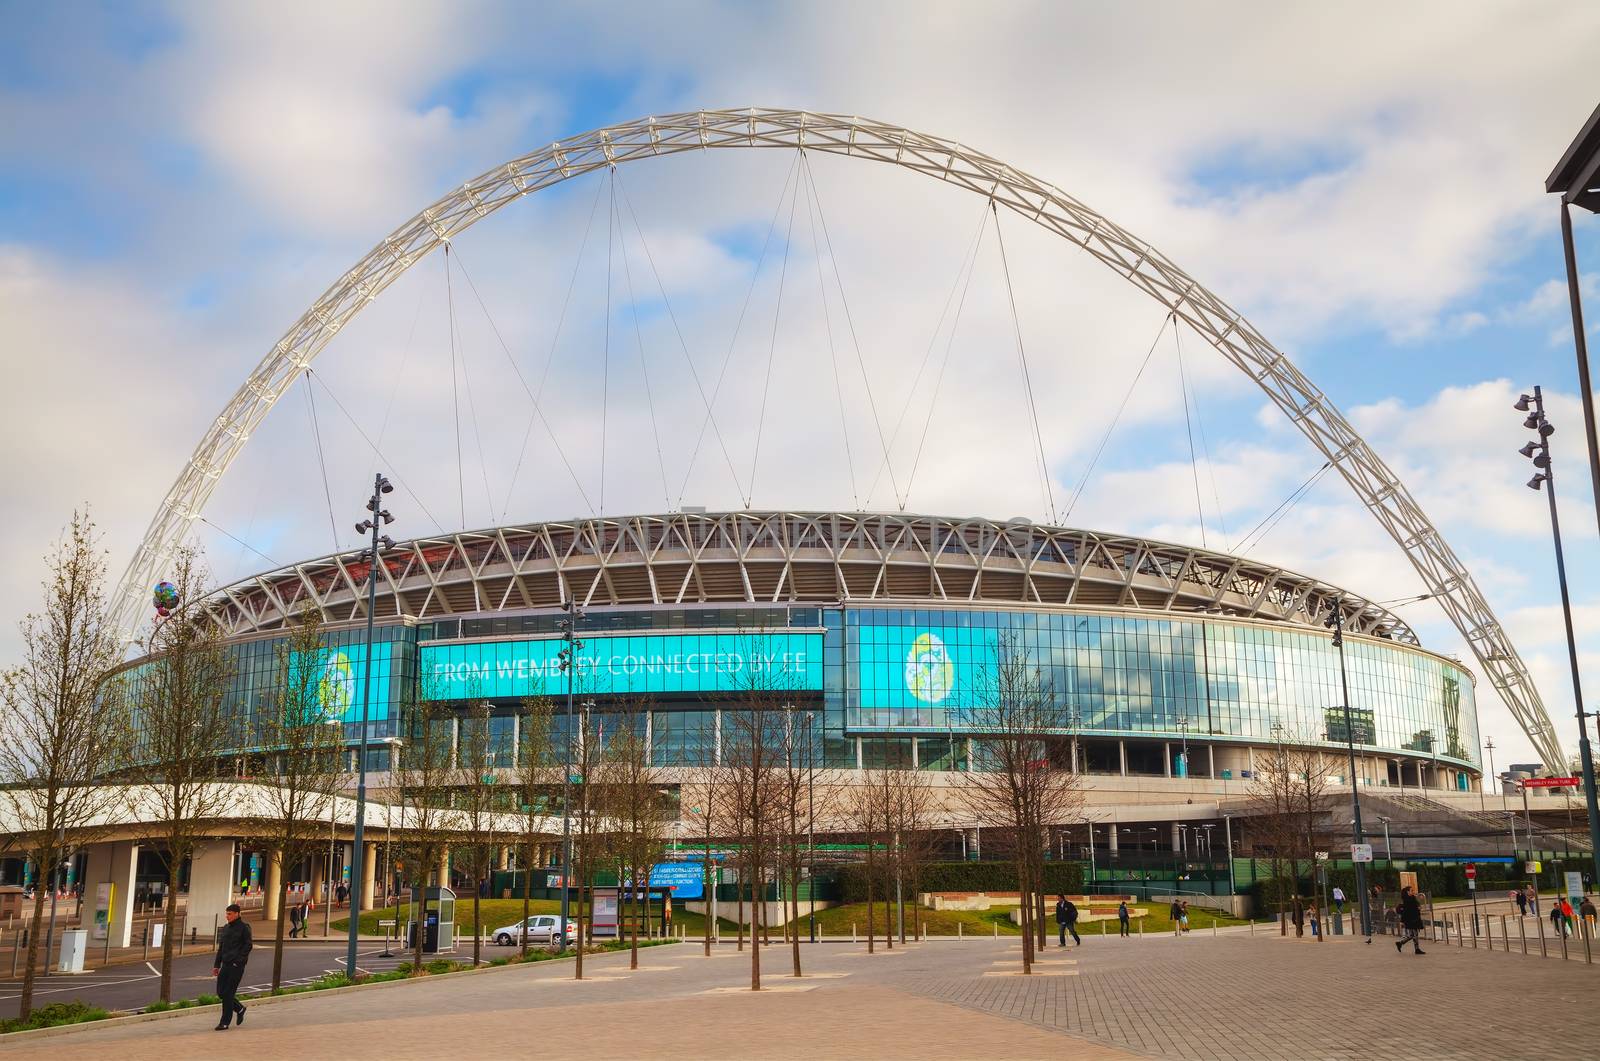 LONDON - APRIL 6: Wembley stadium on April 6, 2015 in London, UK. It's a football stadium in Wembley Park, which opened in 2007 on the site of the original Wembley Stadium which was demolished in 2003